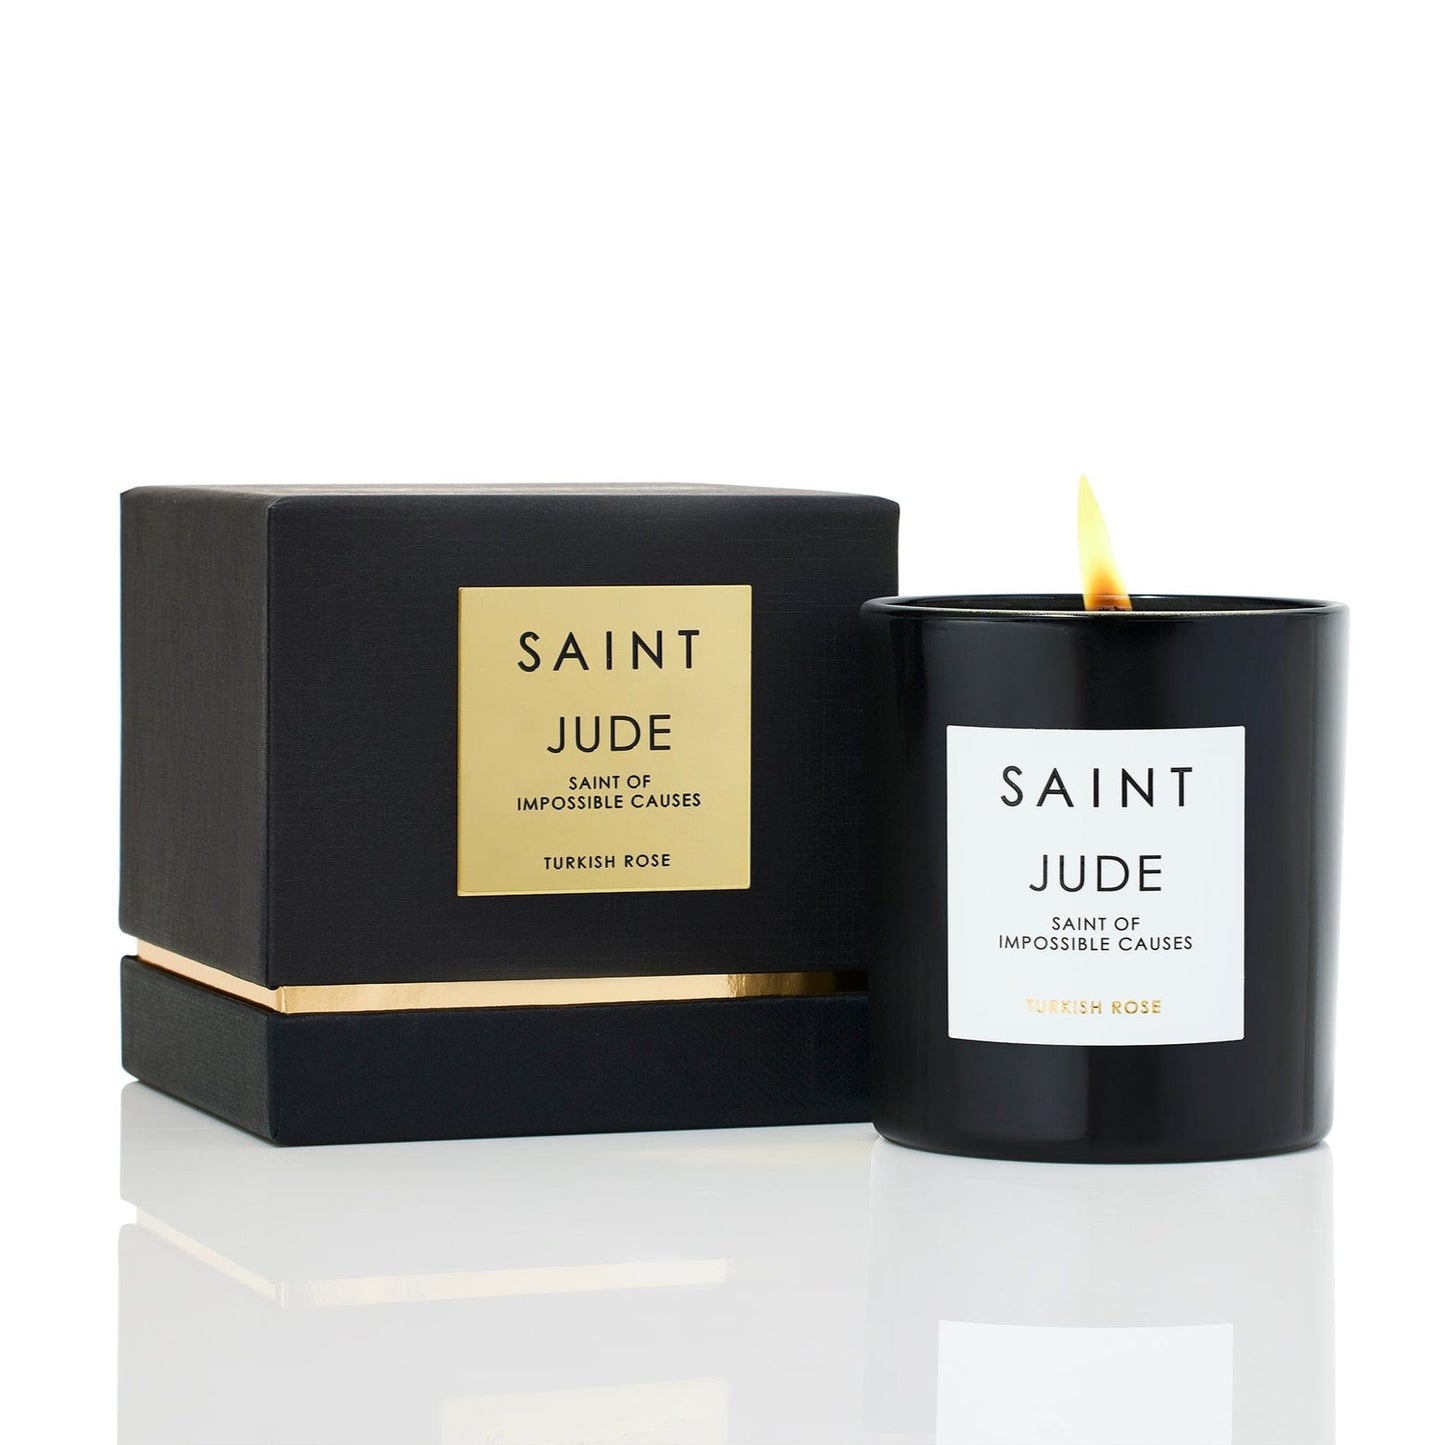 SAINT candle - Jude - Saint of Impossible Causes